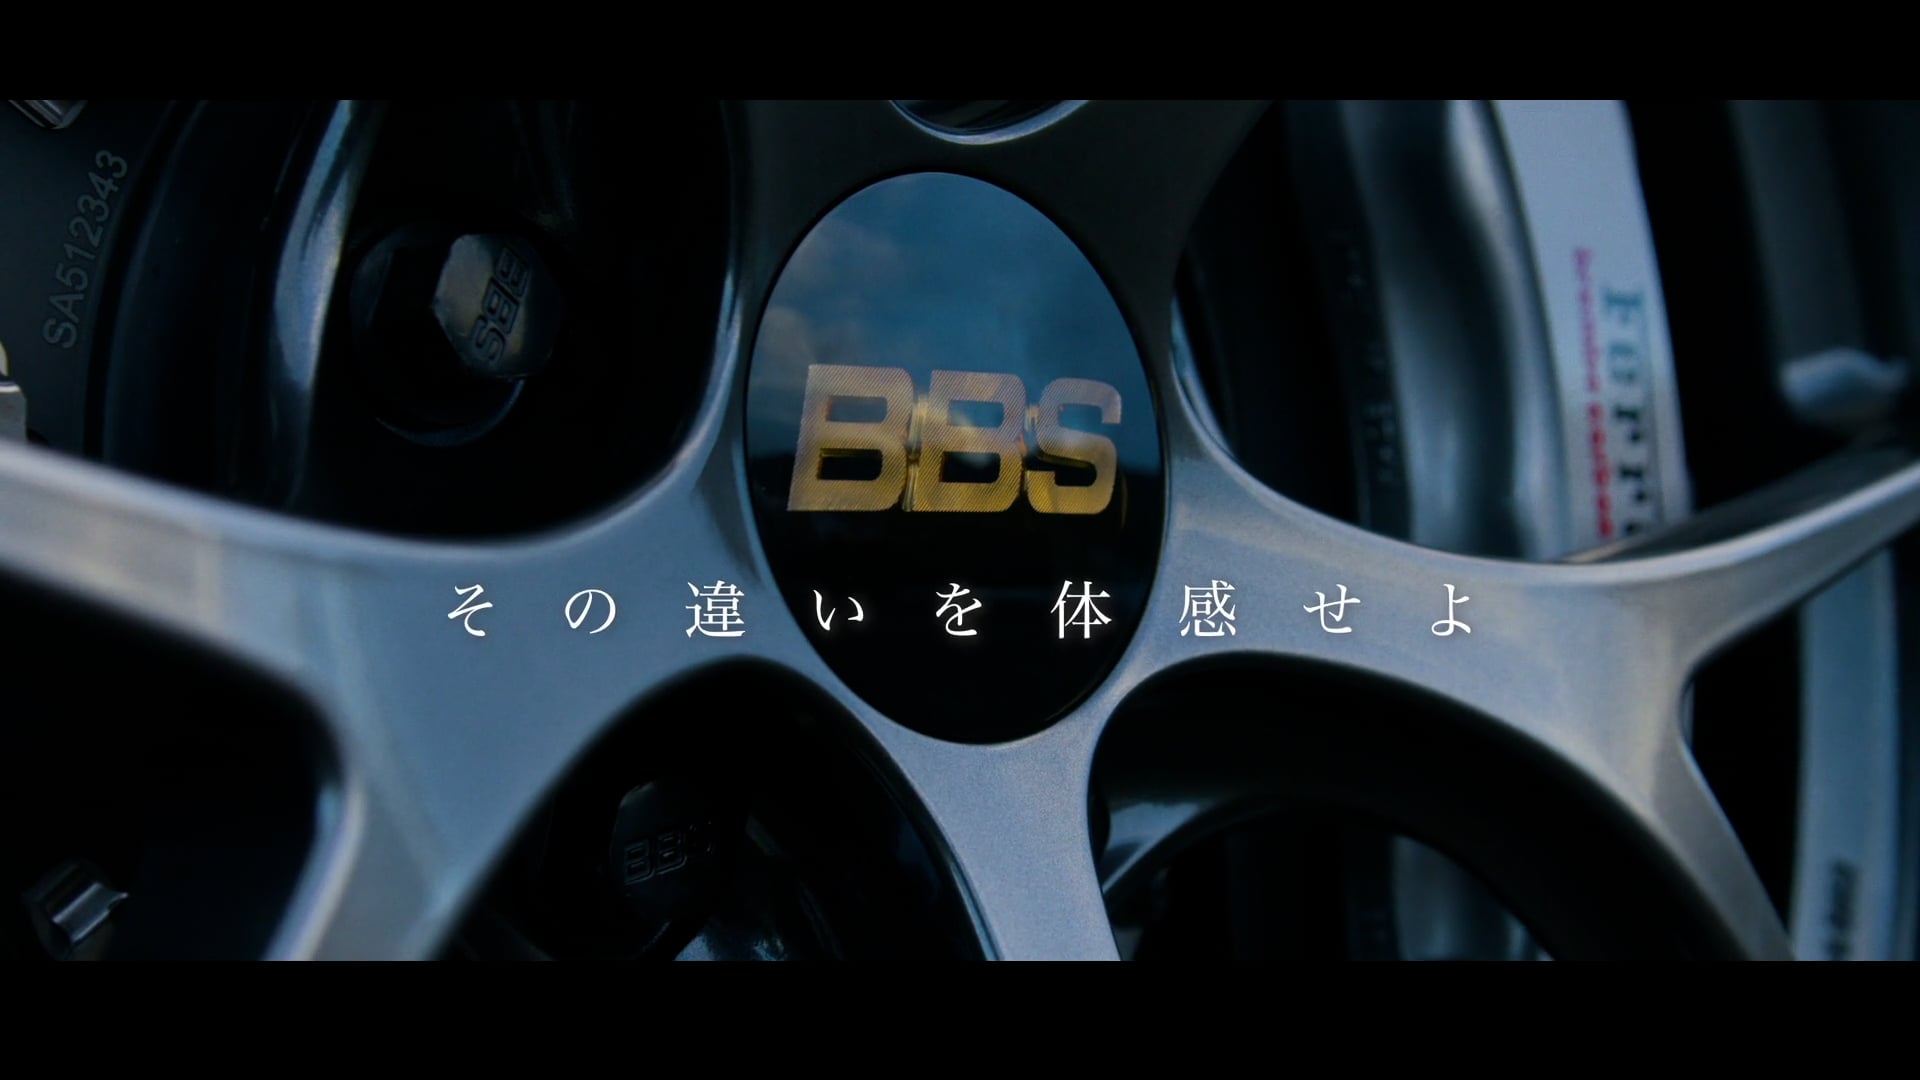 BBS Japan - "Feel the Difference"